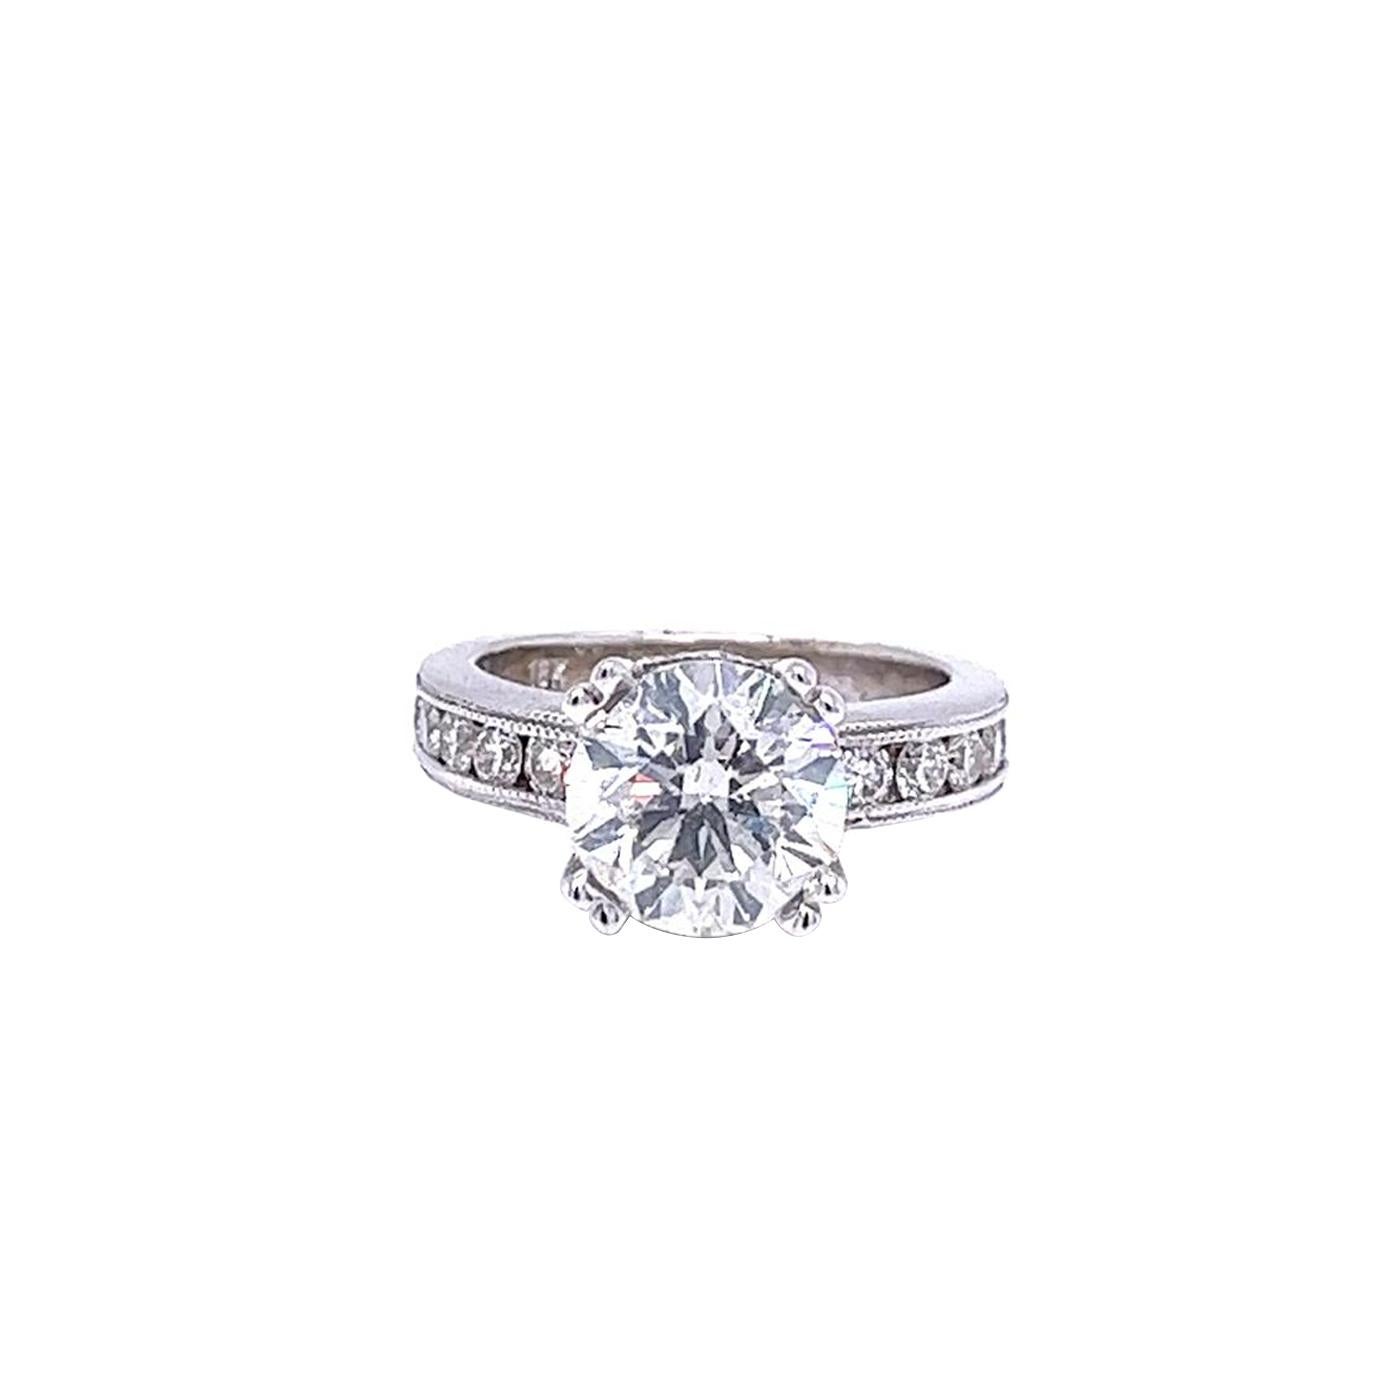 Modernist 2.58ct GIA Natural Round Brilliant Cut Diamond 18K Gold Ring with 0.85ct Diamond For Sale